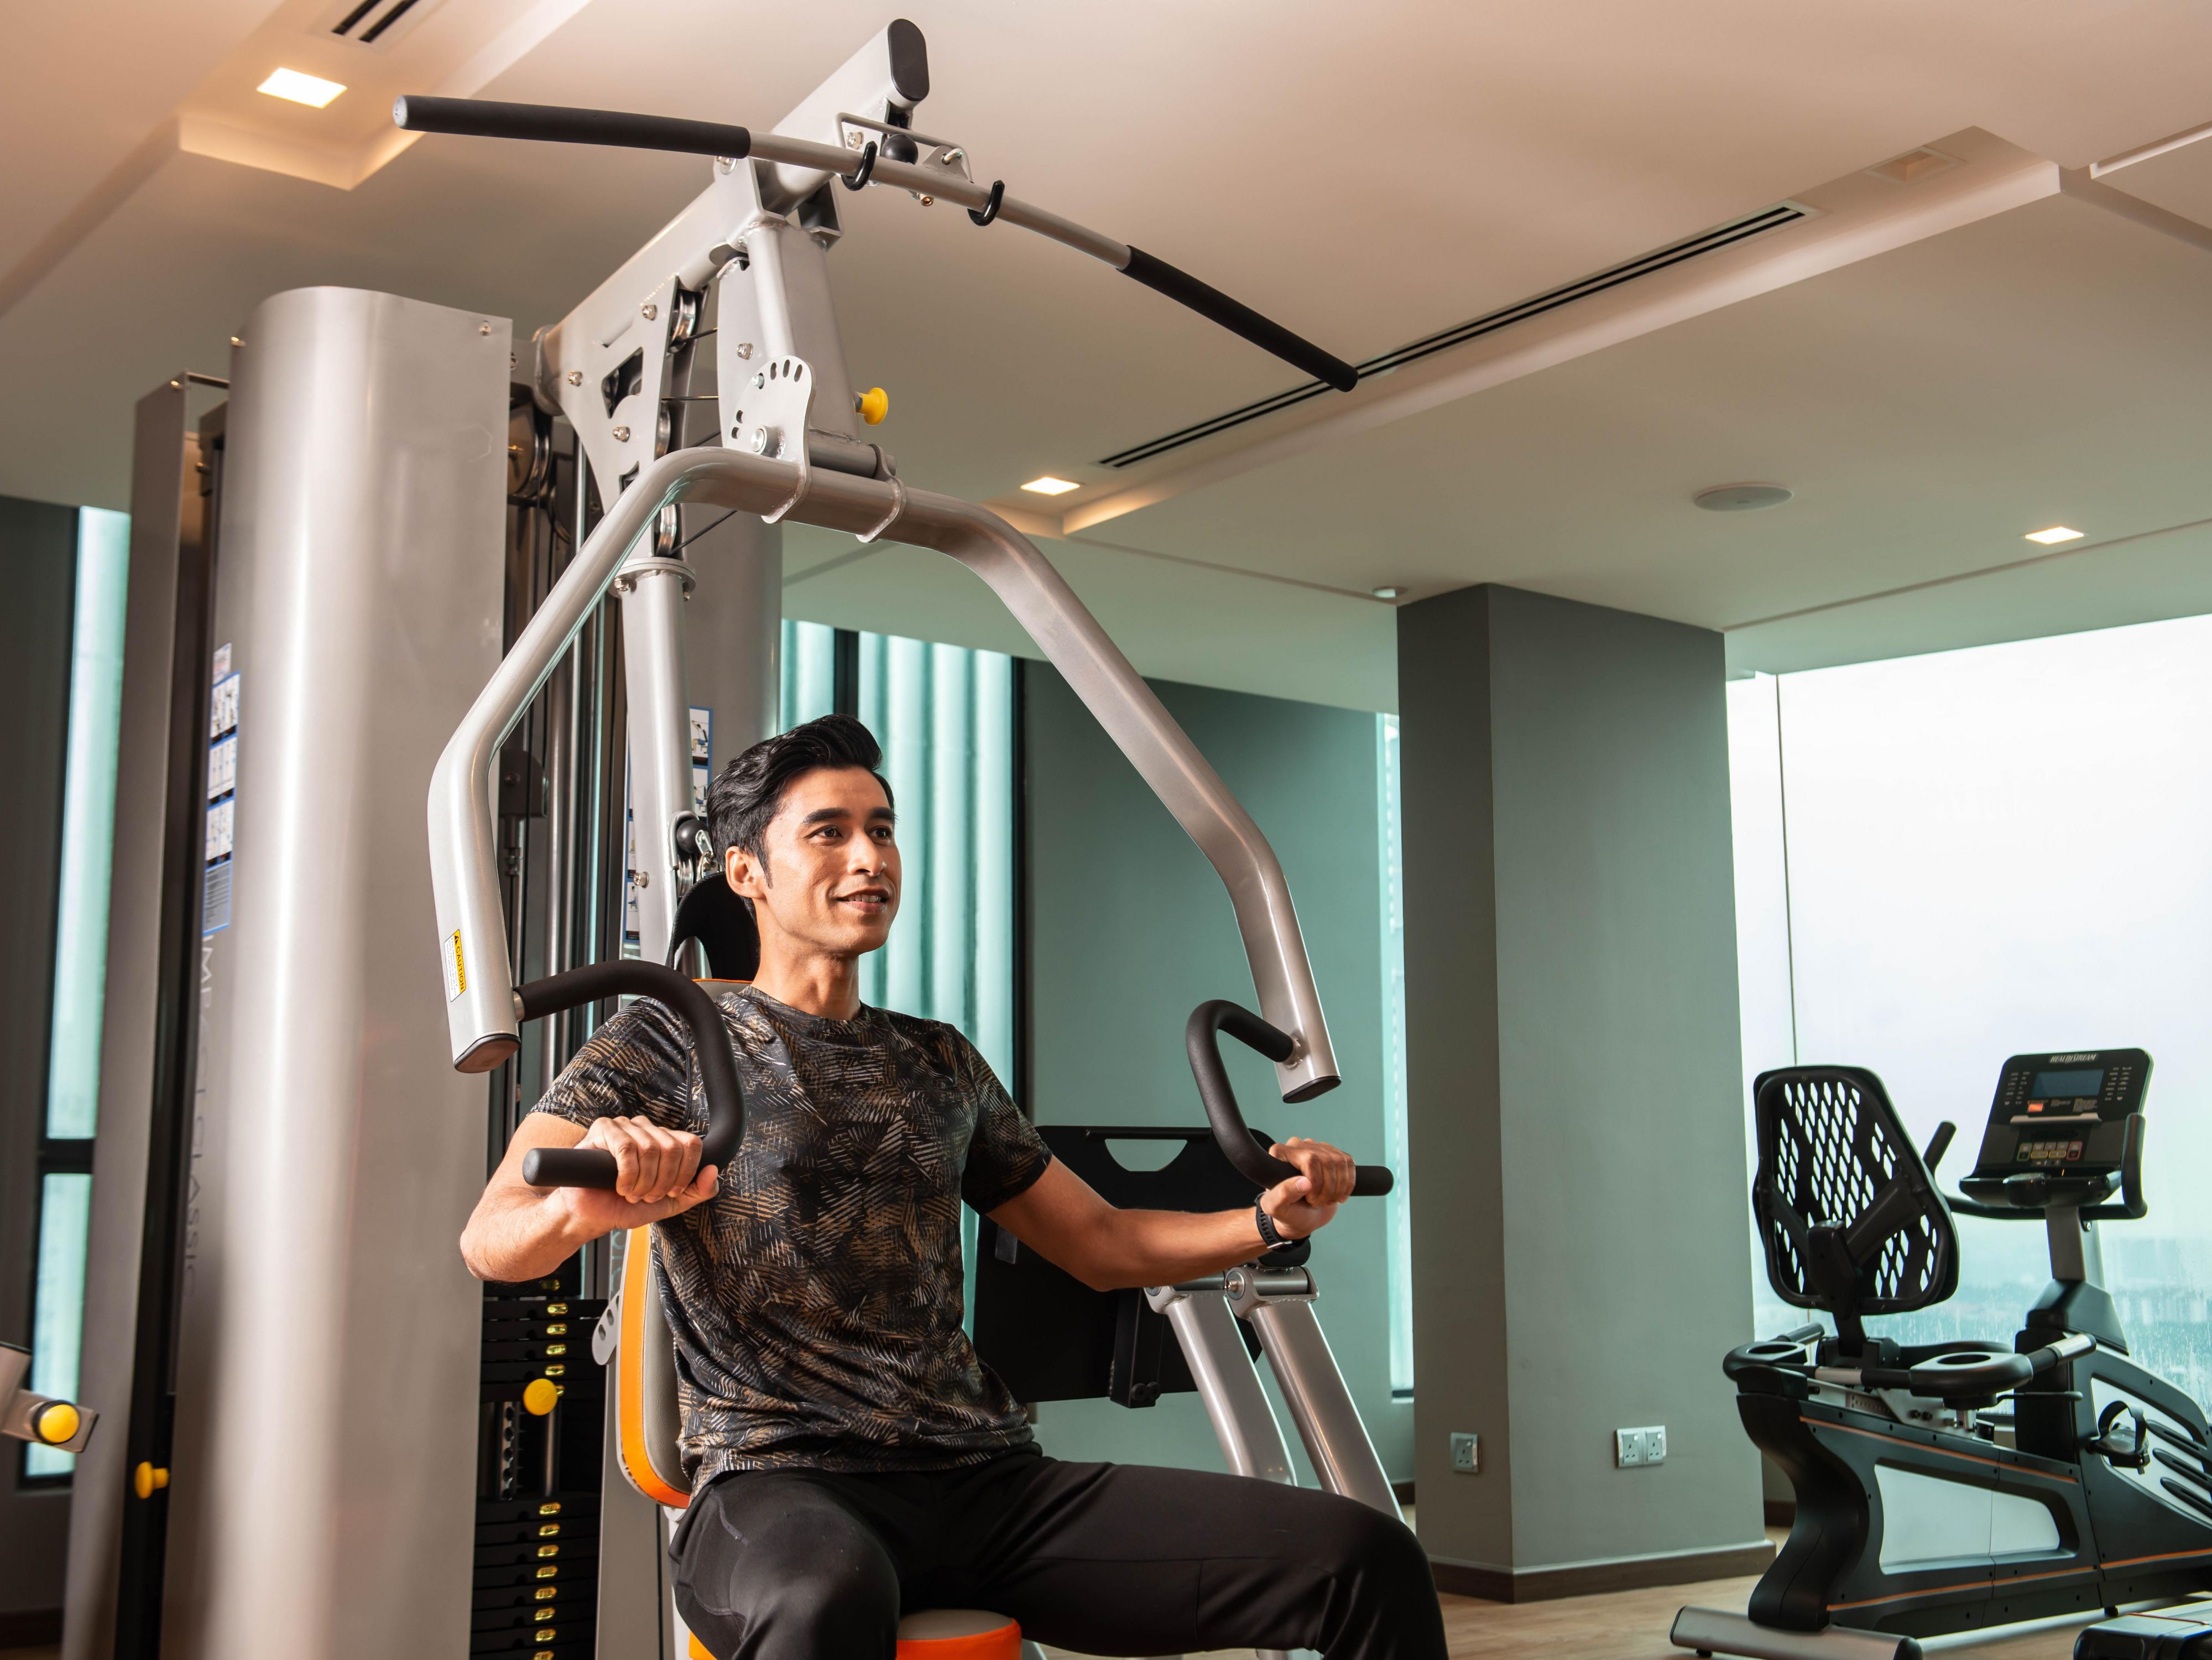 Sweat it out and stay energised during your travels at our well-equipped fitness centre, complete with floor-to-ceiling Johor Bahru city views. Whether it is cardio day, strength training or even a relaxing yoga session, we have everything and more to keep you active.
Operates 24 hours.
Located at level 32.